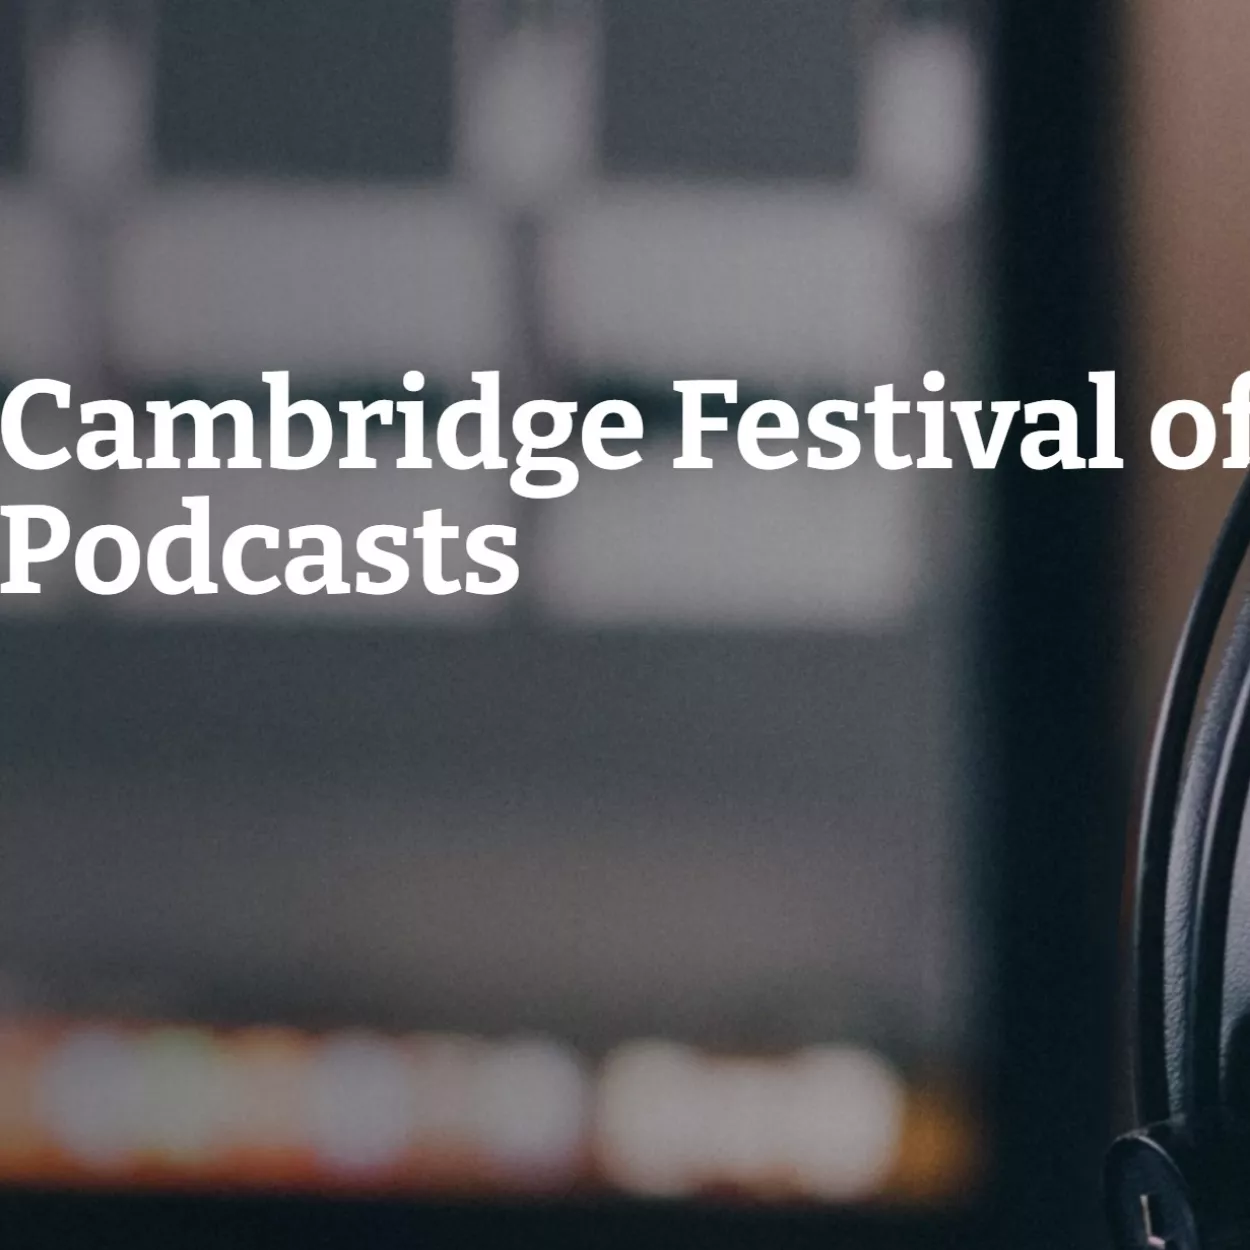 Title 'Cambridge Festival of Podcasts' is in white against a blurred grey background